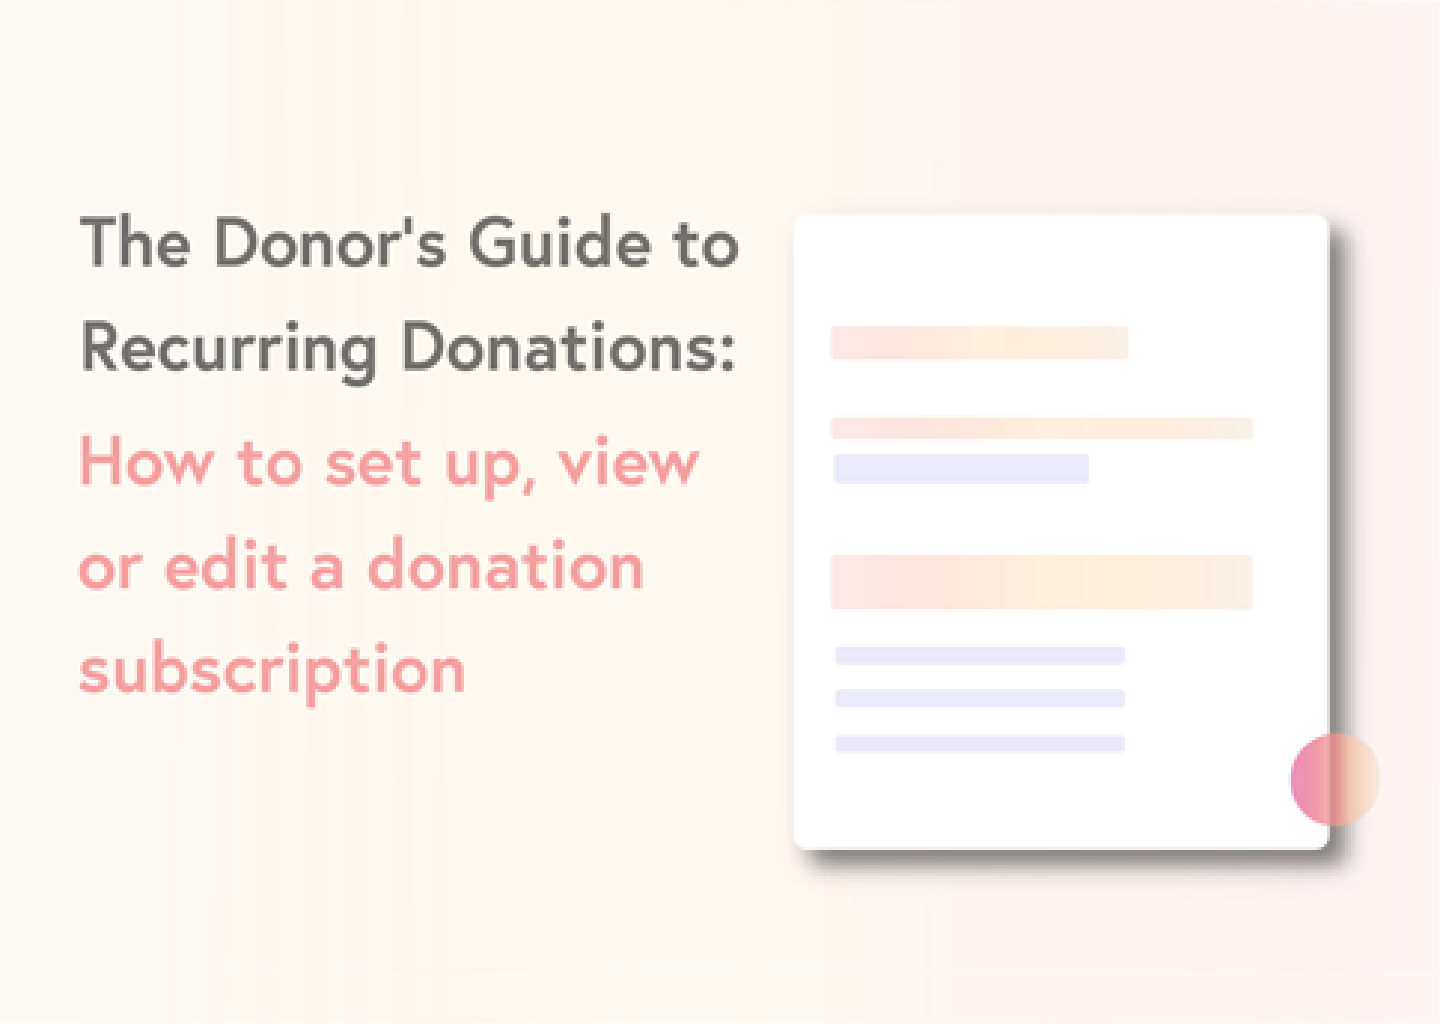 The Donor’s Guide to Recurring Donations: How to set up, view or edit a donation subscription